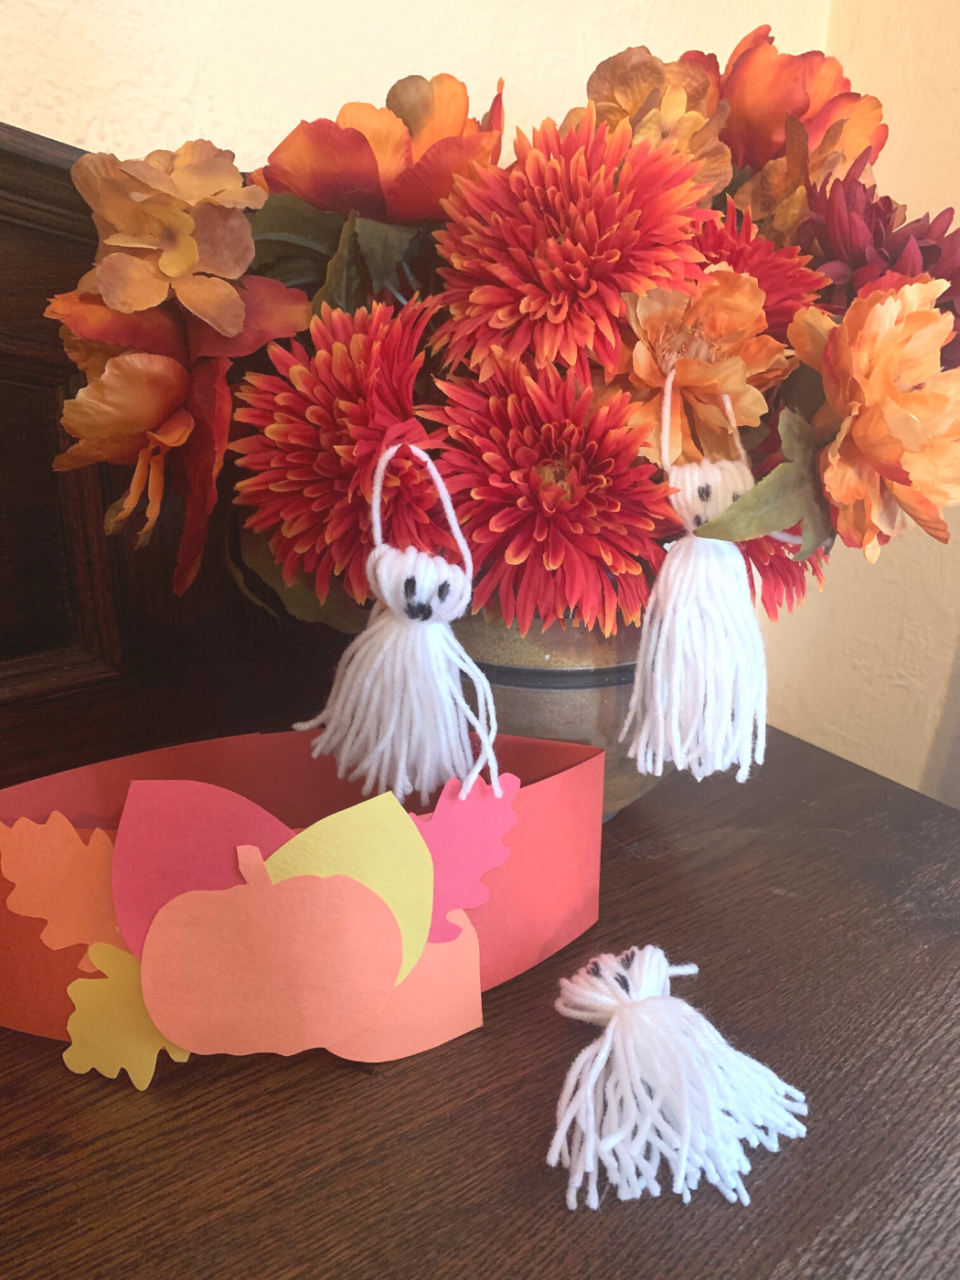 A pumpkin headband and three ghost crafts on a table in front of a fall flower arrangement